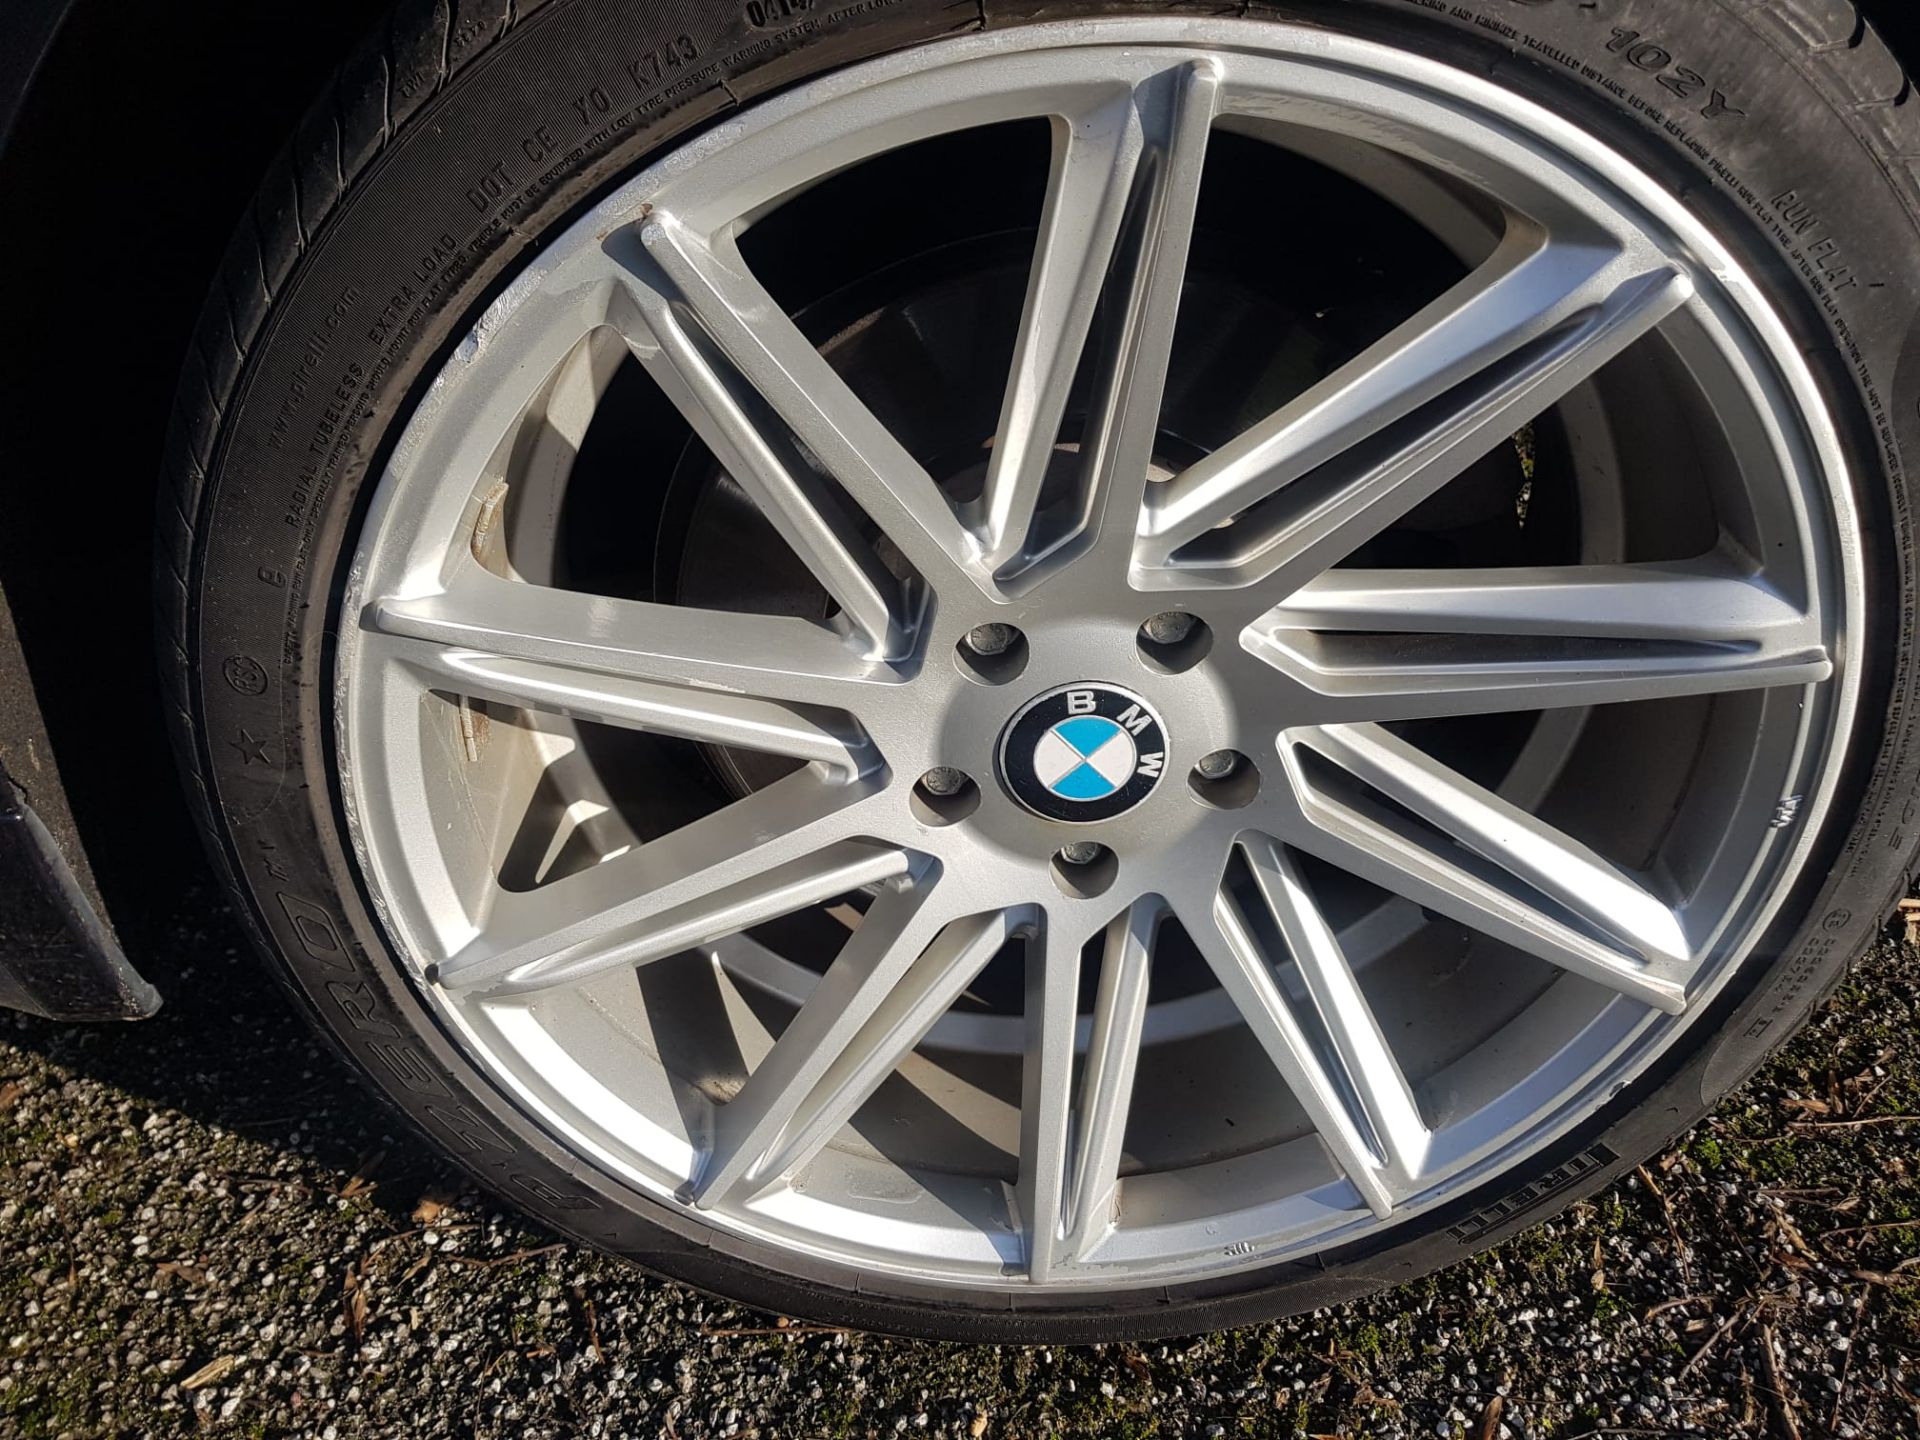 2014 730D M-SPORT SALOON - FULL SERVICE HISTORY - 115K MILES - Image 17 of 43